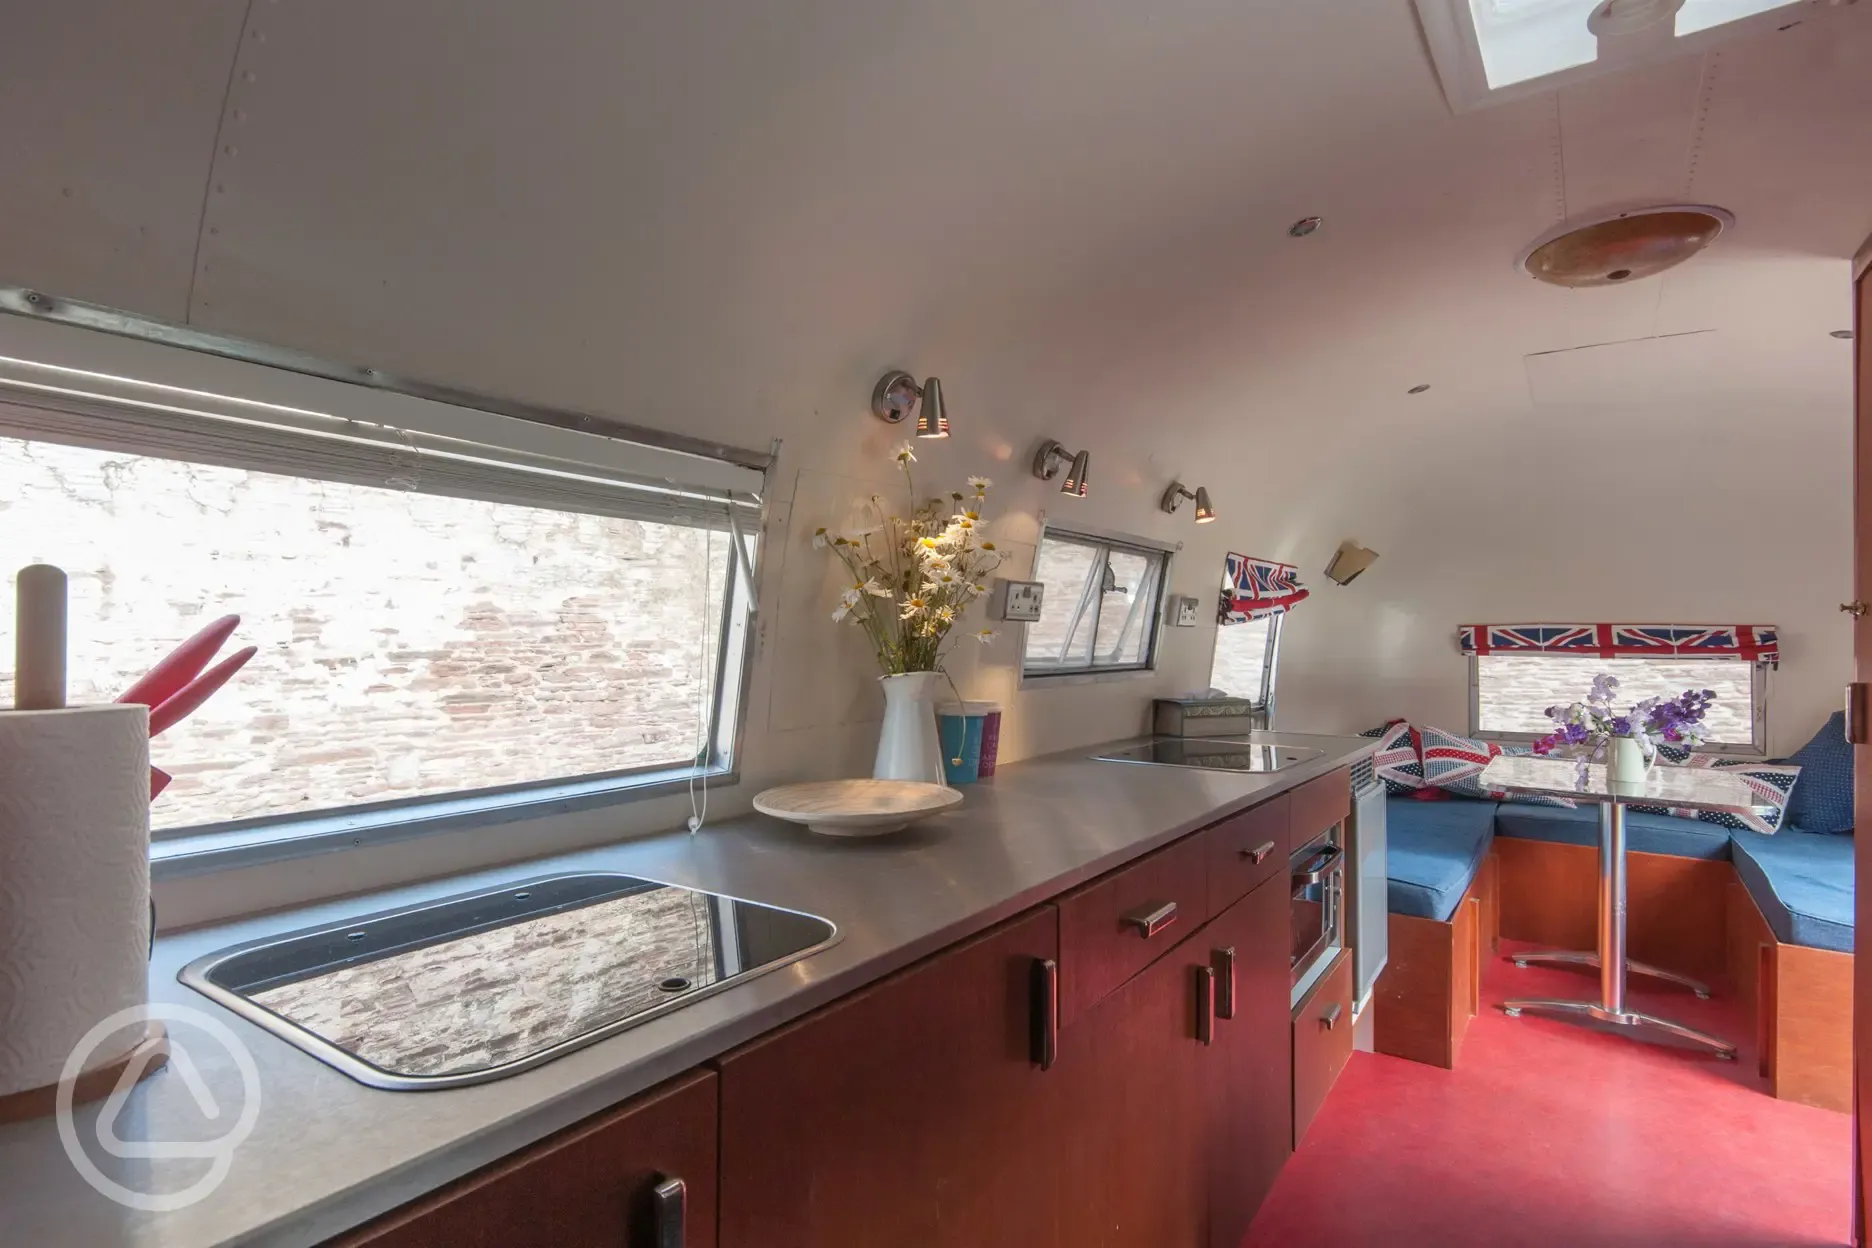 Airstream has an onboard kitchen and flushing toilet.